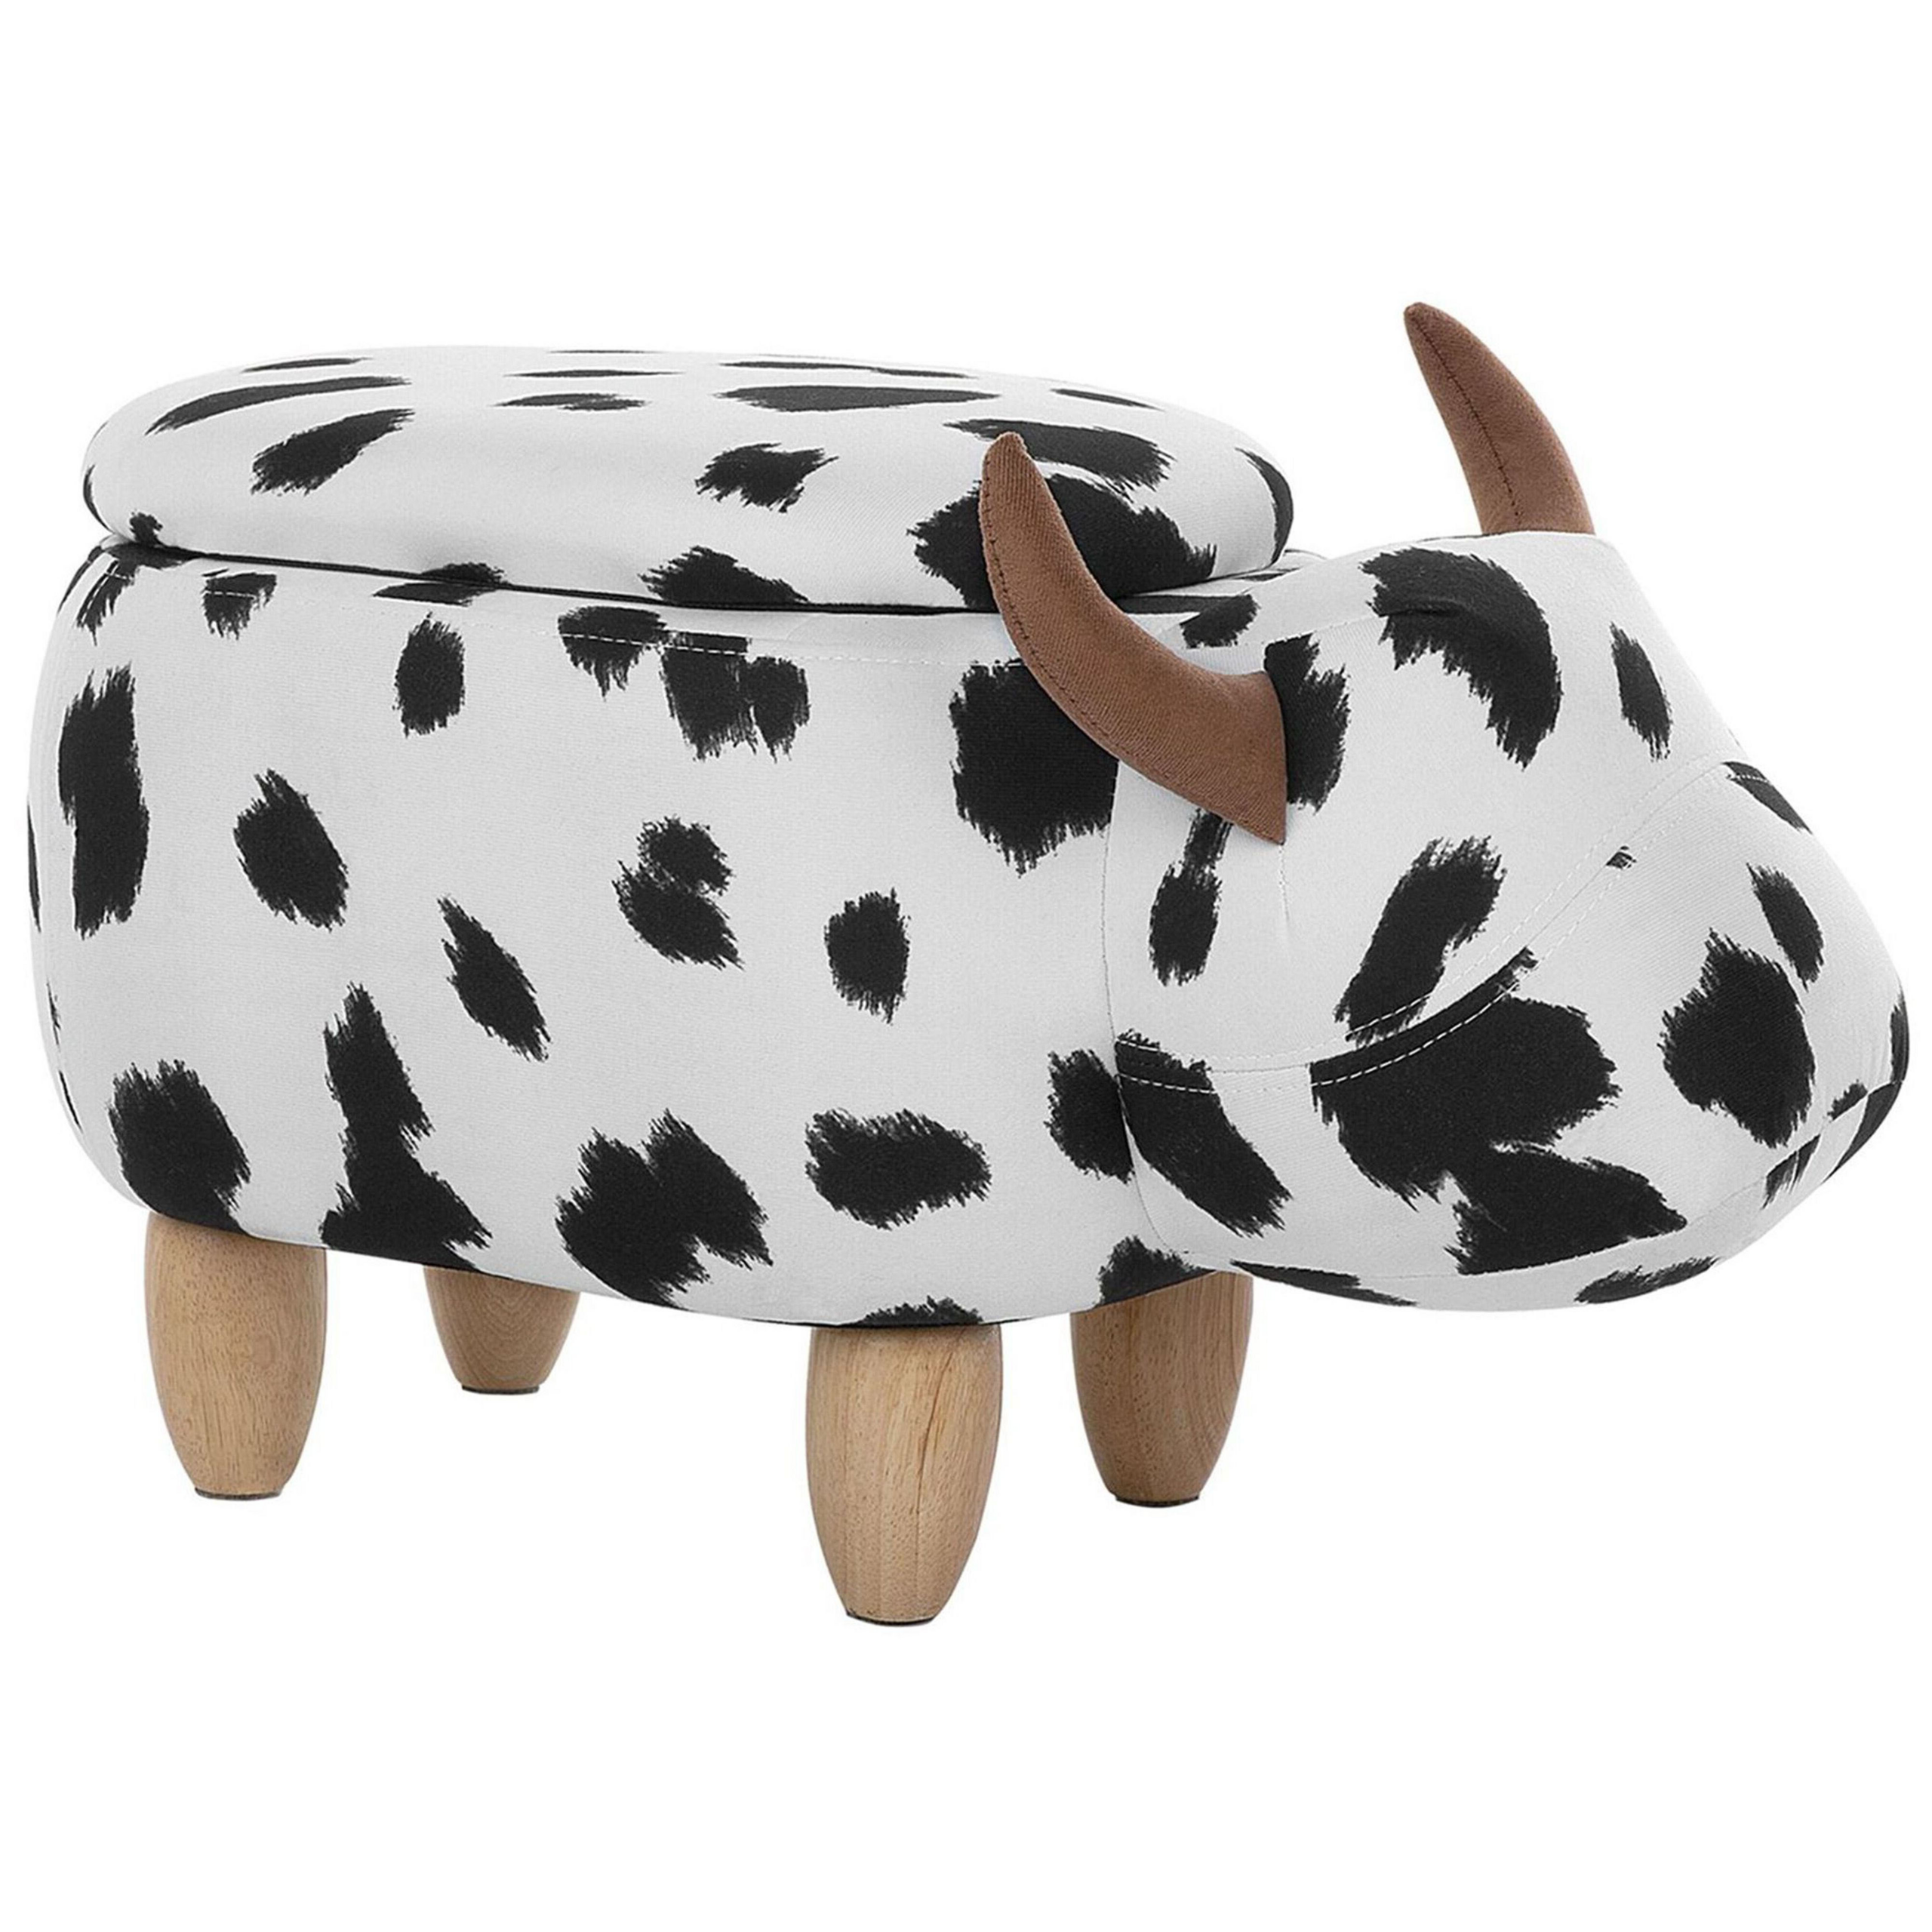 Beliani Animal Cow Children Stool with Storage Black and White Faux Leather Wooden Legs Nursery Footstool